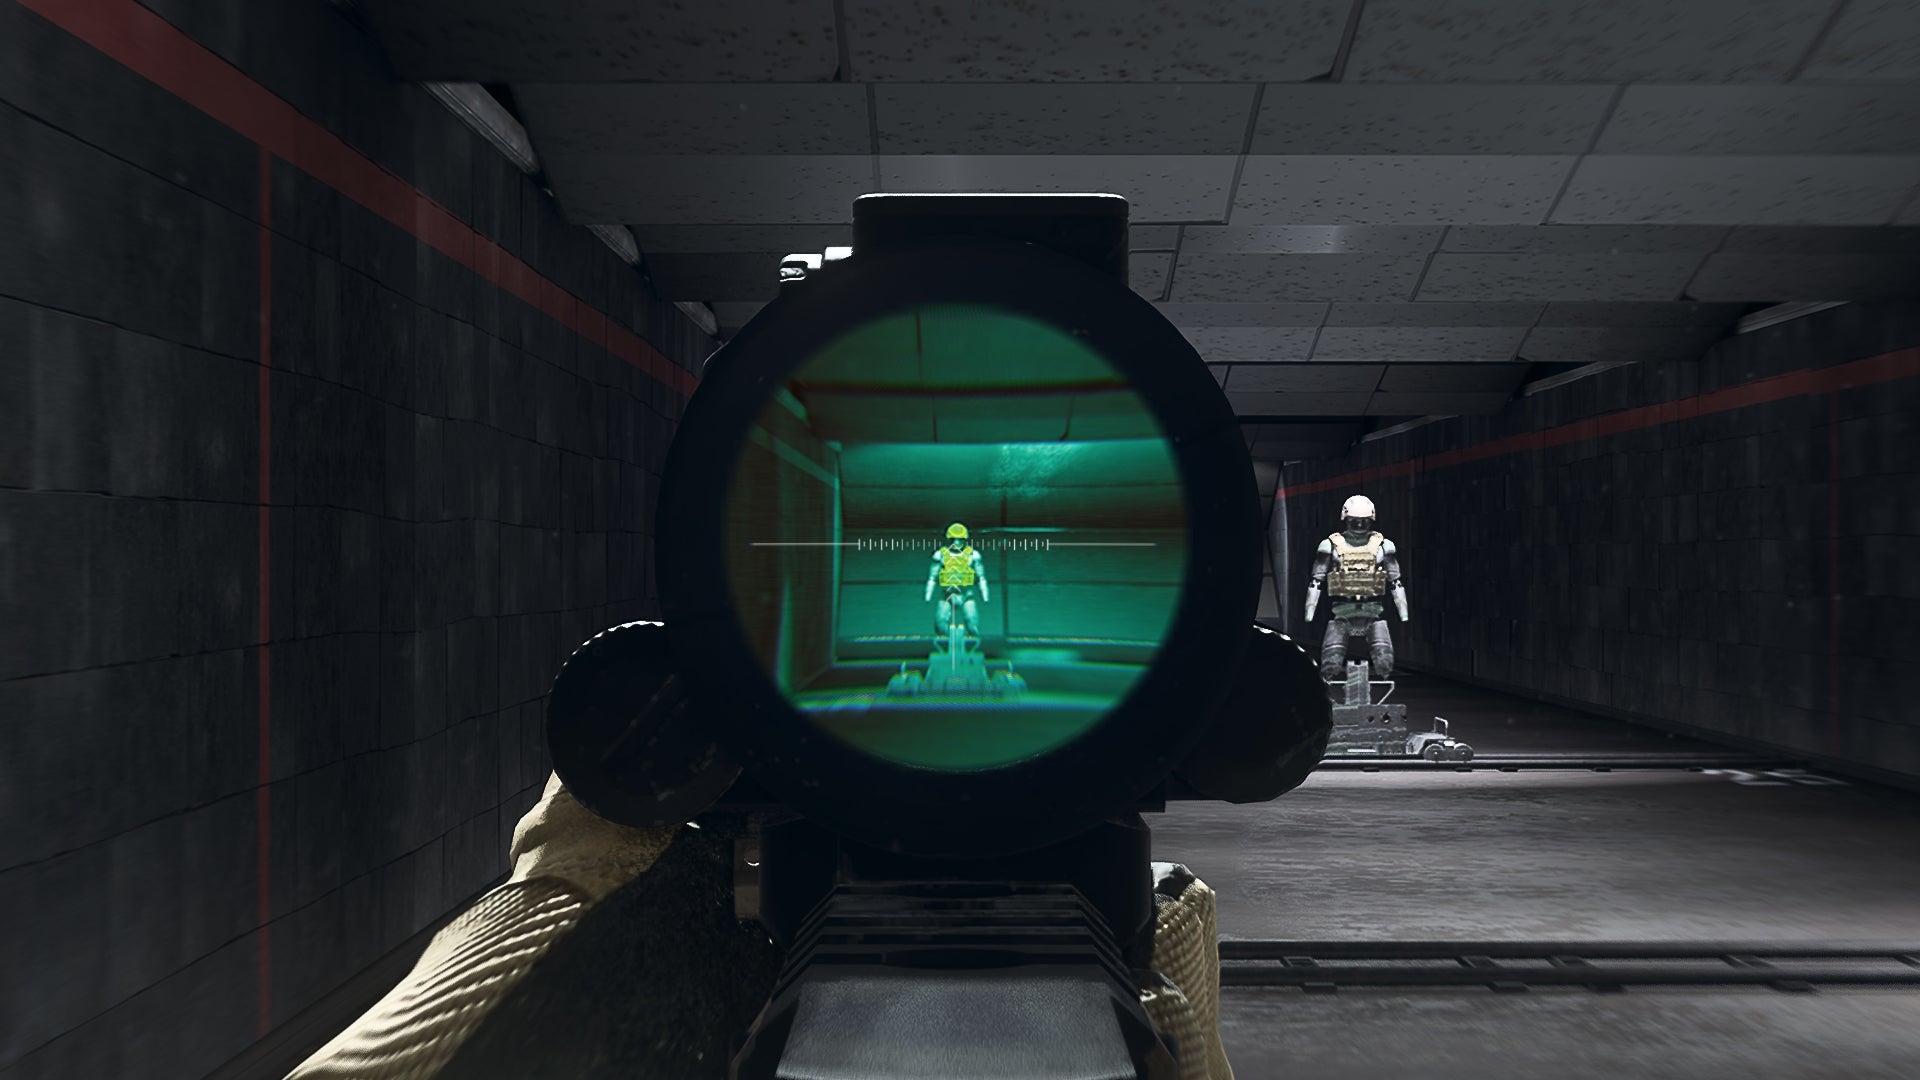 The player in Warzone 2.0 aims at a training dummy using the Teplo OP-3 Scope optic attachment.